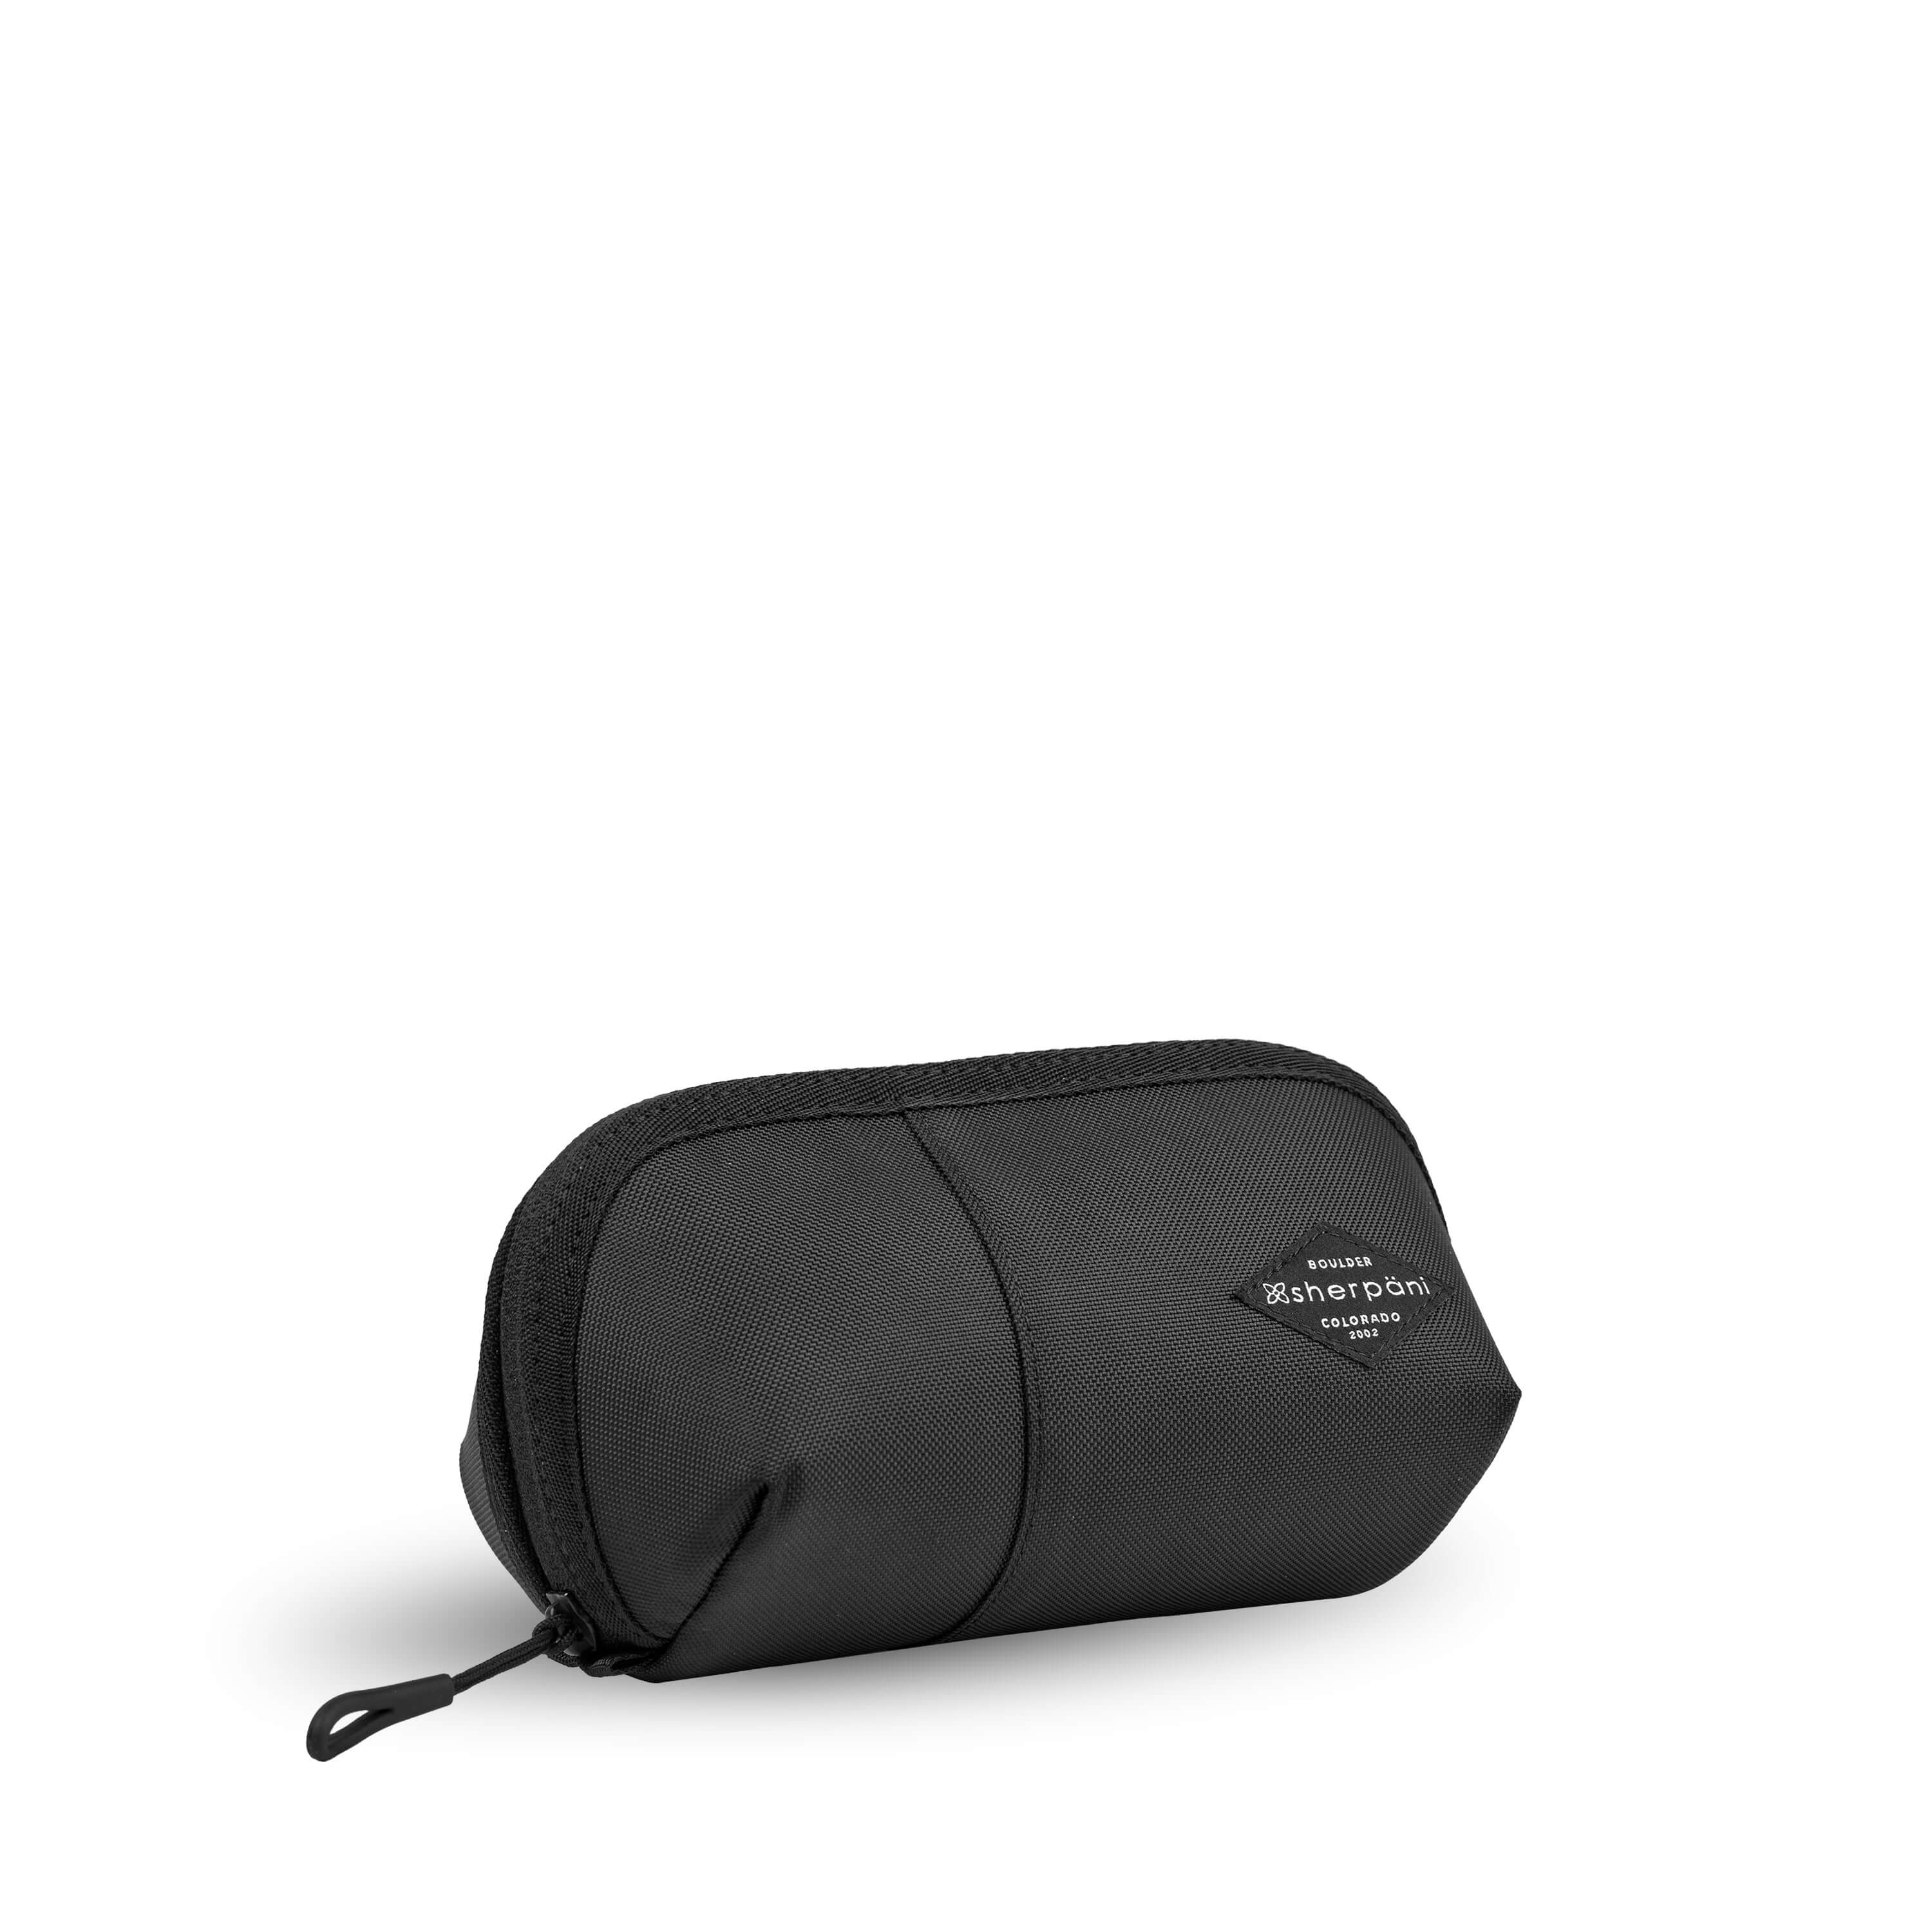 Angled front view of Sherpani travel accessory, the Harmony in Lavender. The pouch is entirely black. It has an easy-pull zipper that is accented in black.